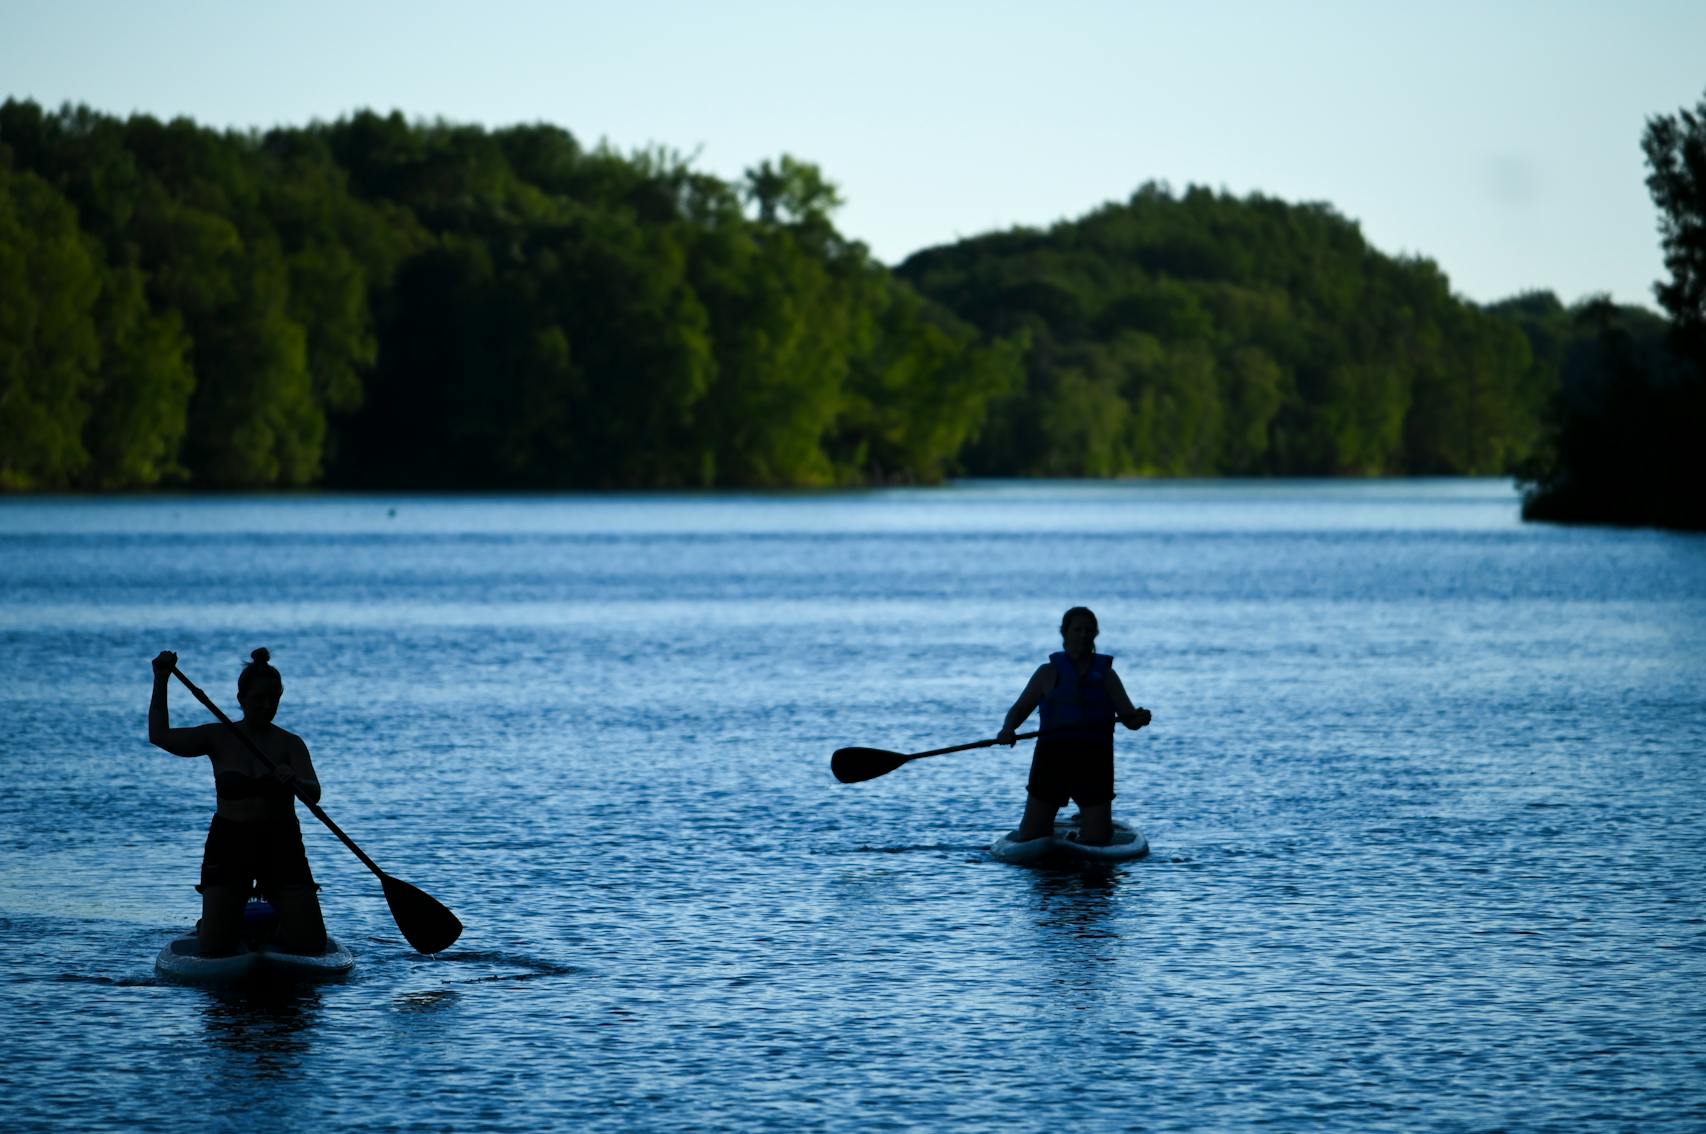 All manner of paddle sports, scuba diving and fishing have huge followings. There are more than a dozen mine lakes in the recreation area.